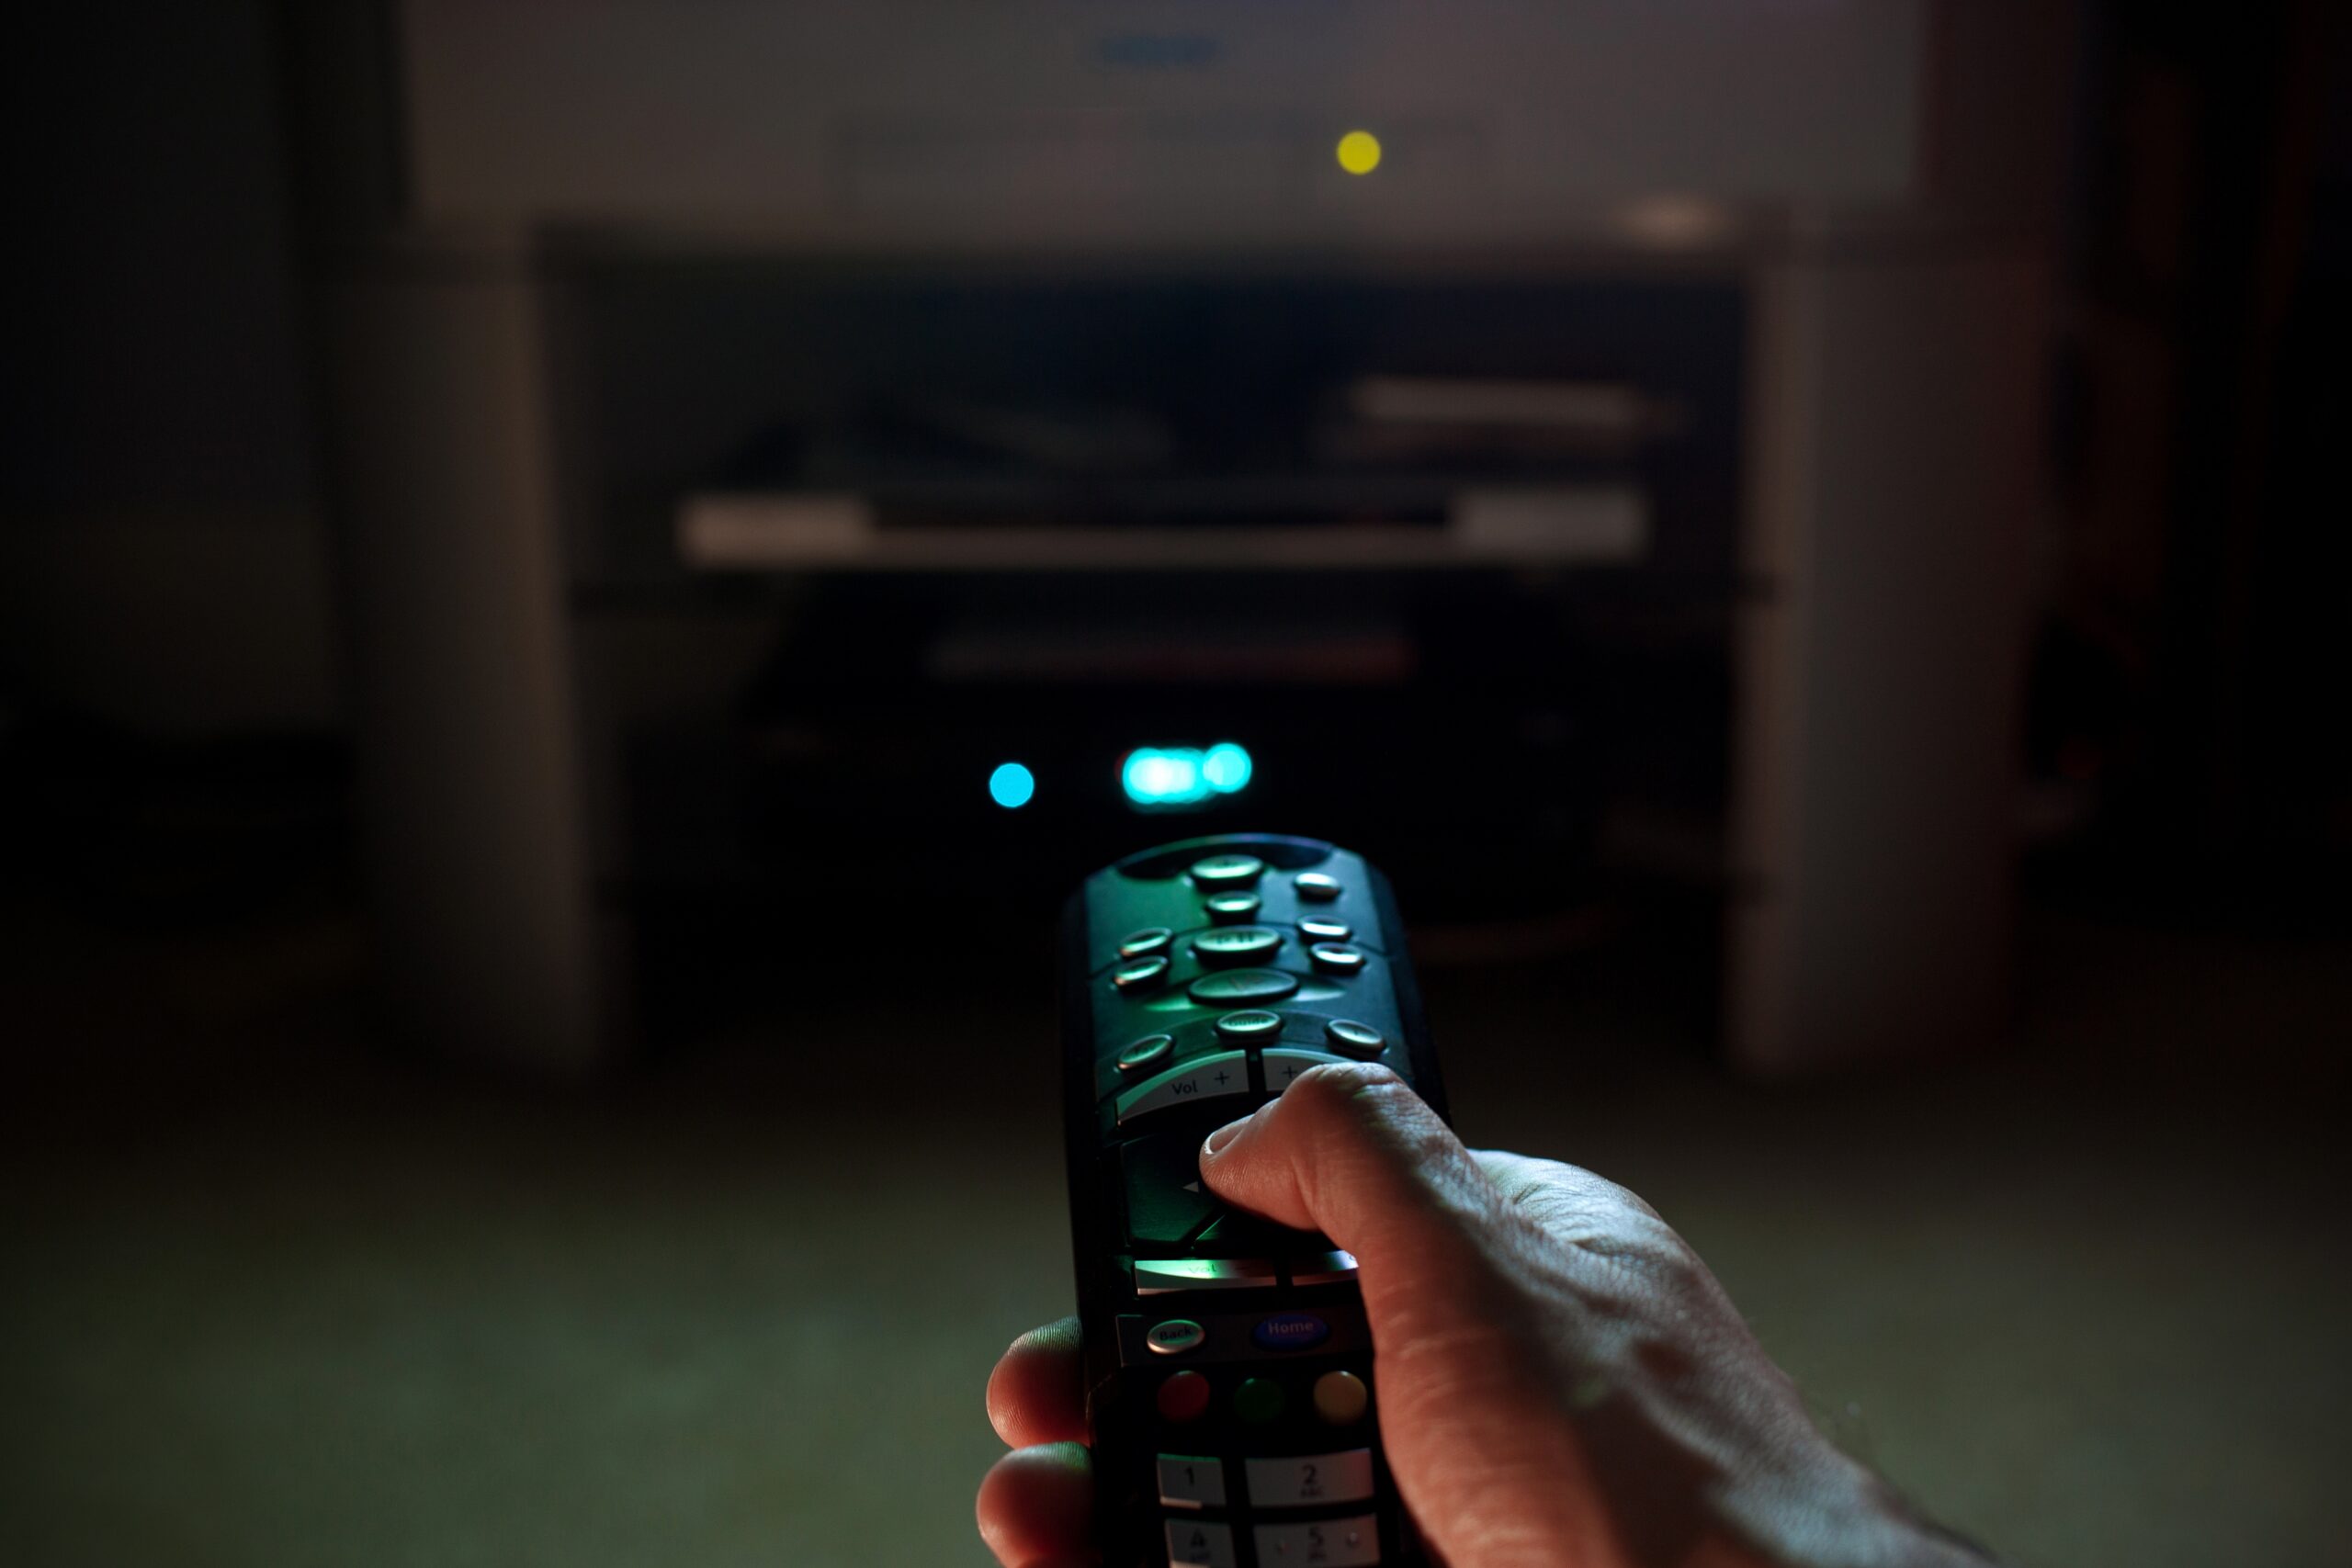 remote pointing at television